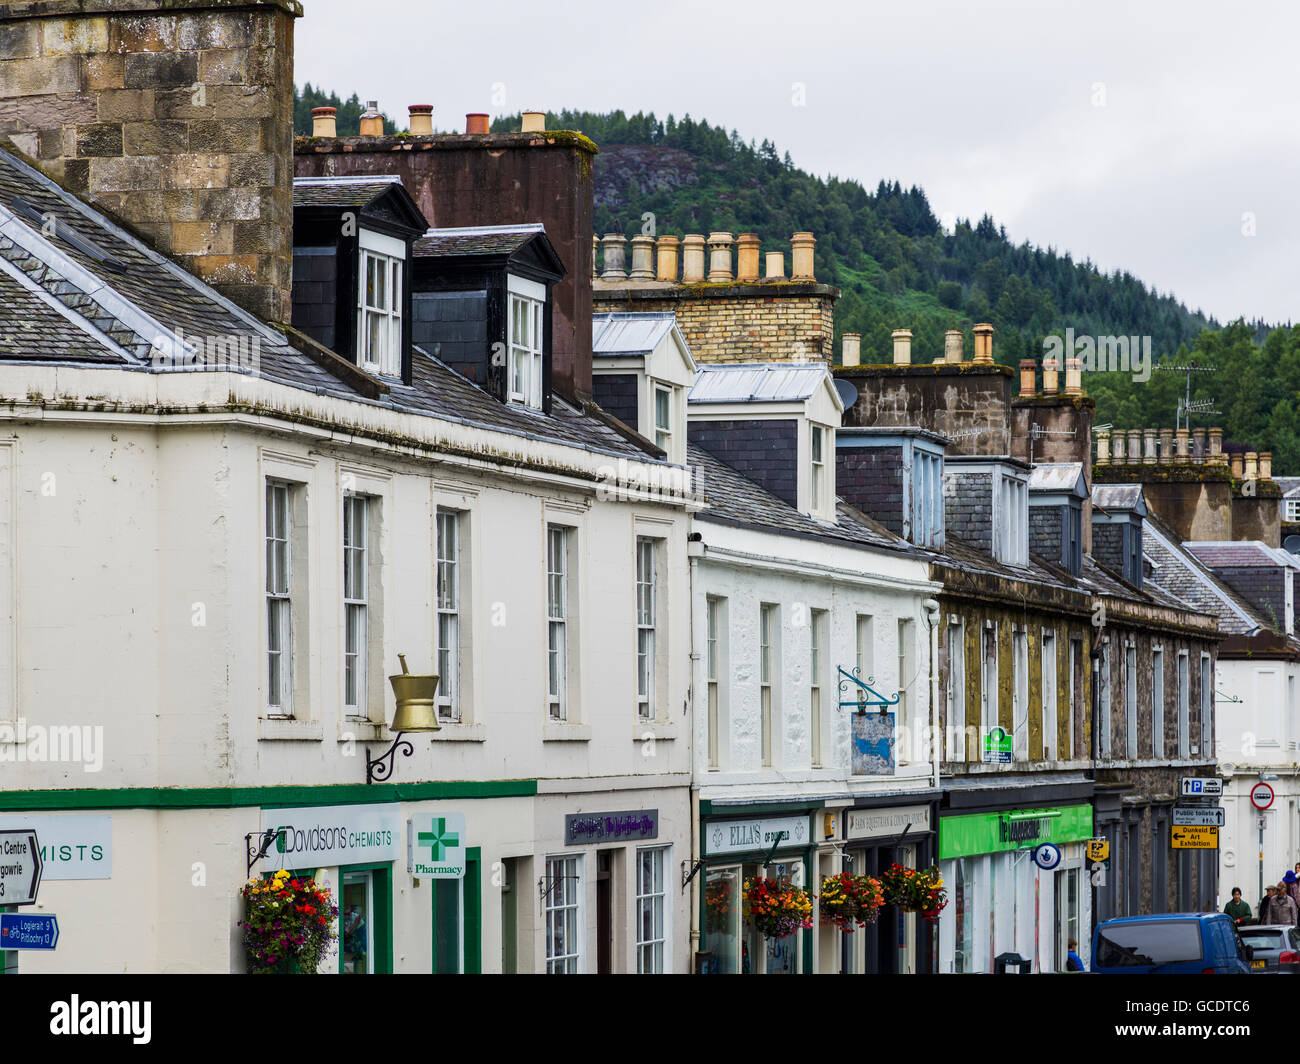 Buildings with shops and chimneys on the rooftops in a row; Dunkeld, Perth and Kinross, Scotland Stock Photo